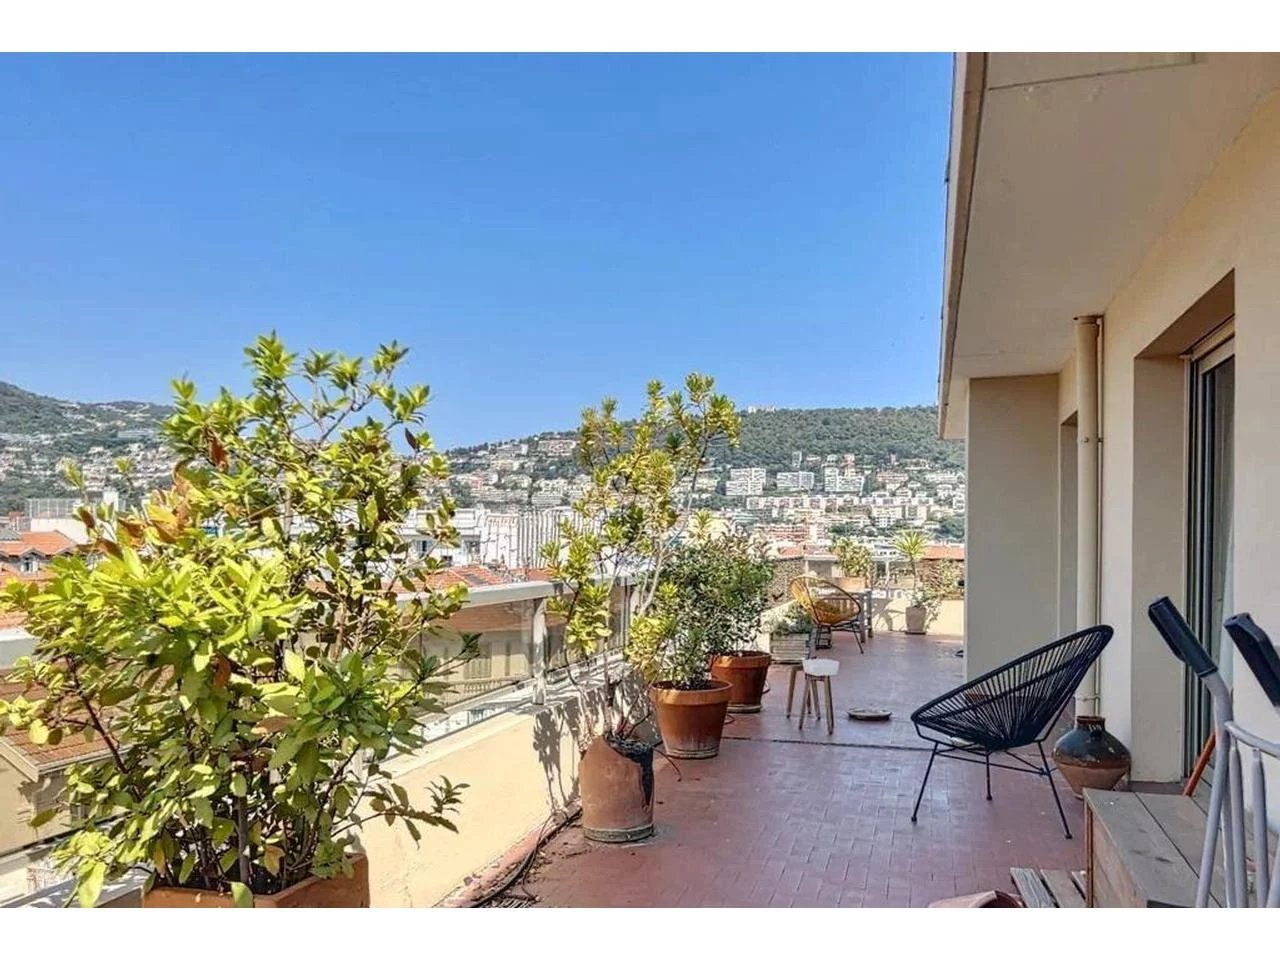 Appartement  3 Rooms 85.35m2  for sale   599 000 €